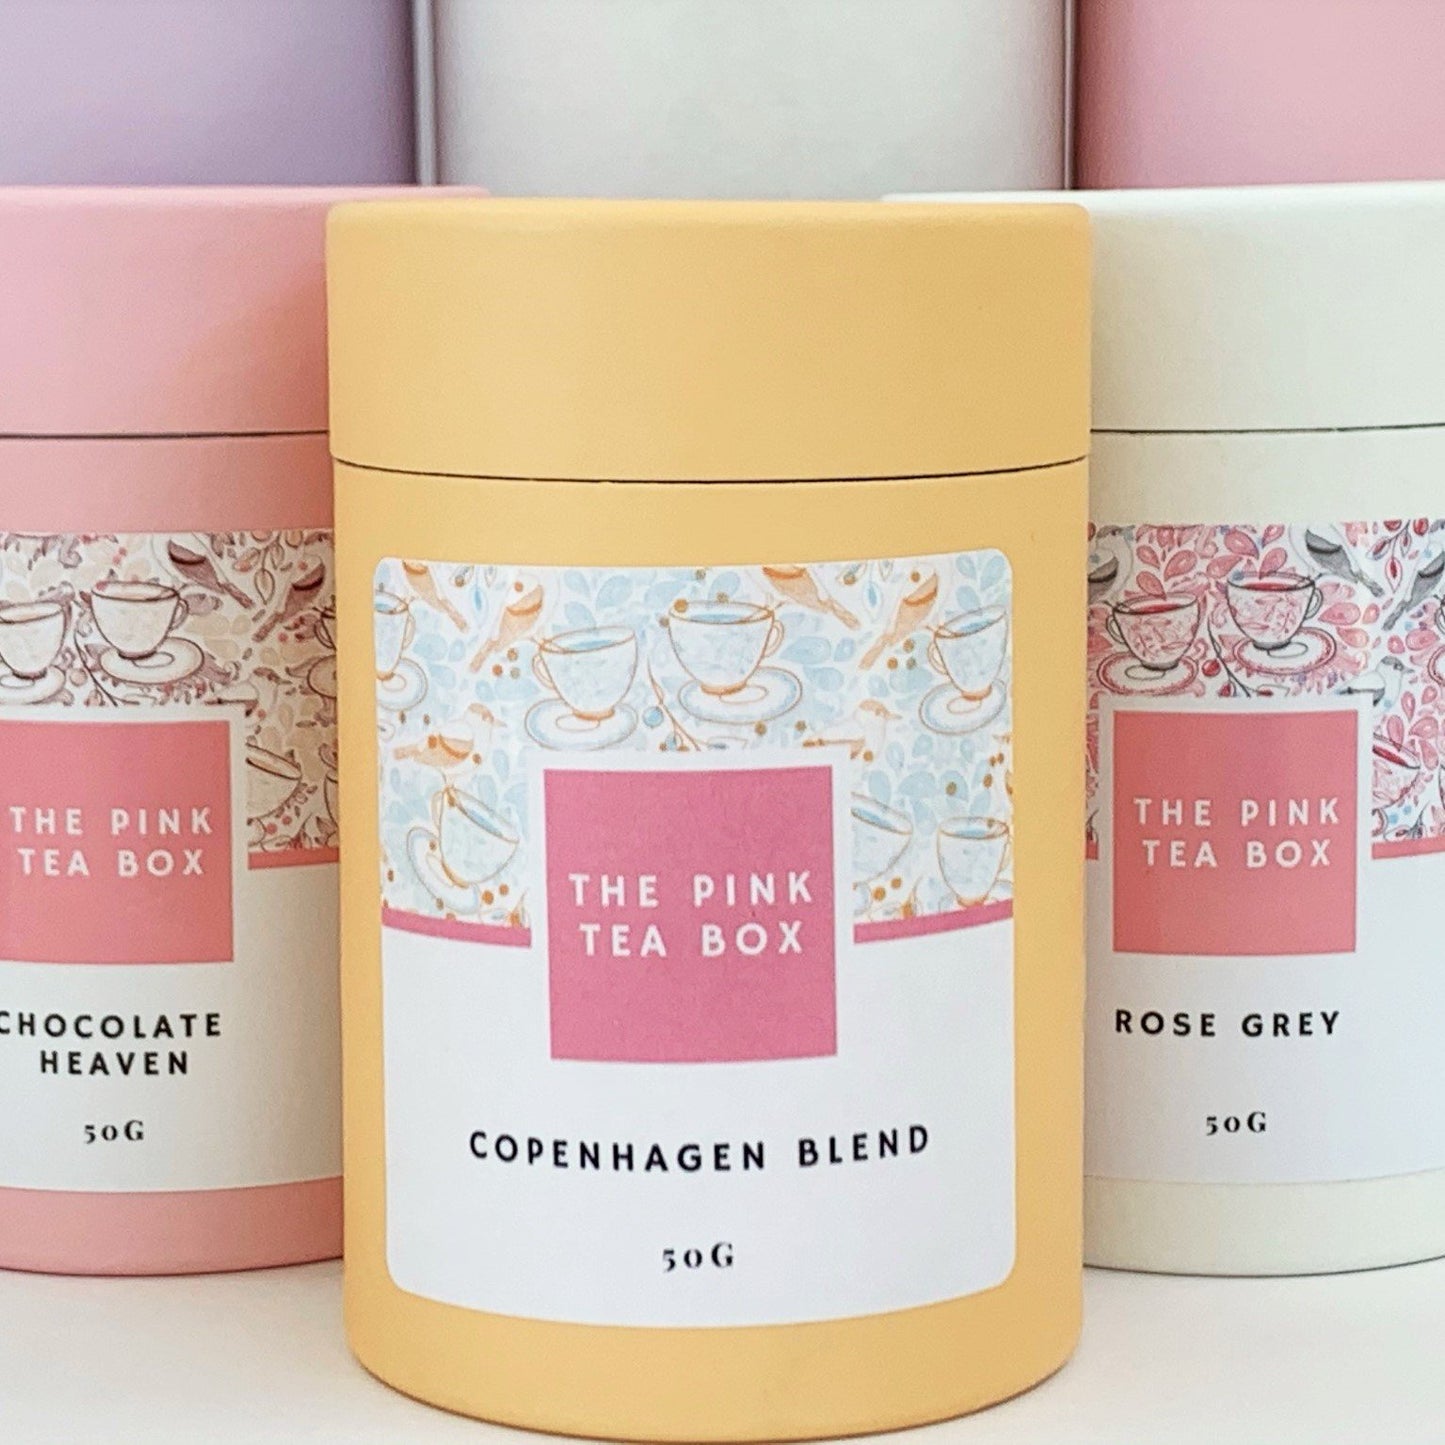 Our award winning Copenhagen tea, is the perfect gift for any tea lover. Best loose leaf tea / best tasting Australian tea.  Delicate orange, vanilla & soft tones of apricot are combined to create this beautiful tea, (our twist on the classic Stockholm tea), finished with a fresh bouquet of floral notes. 